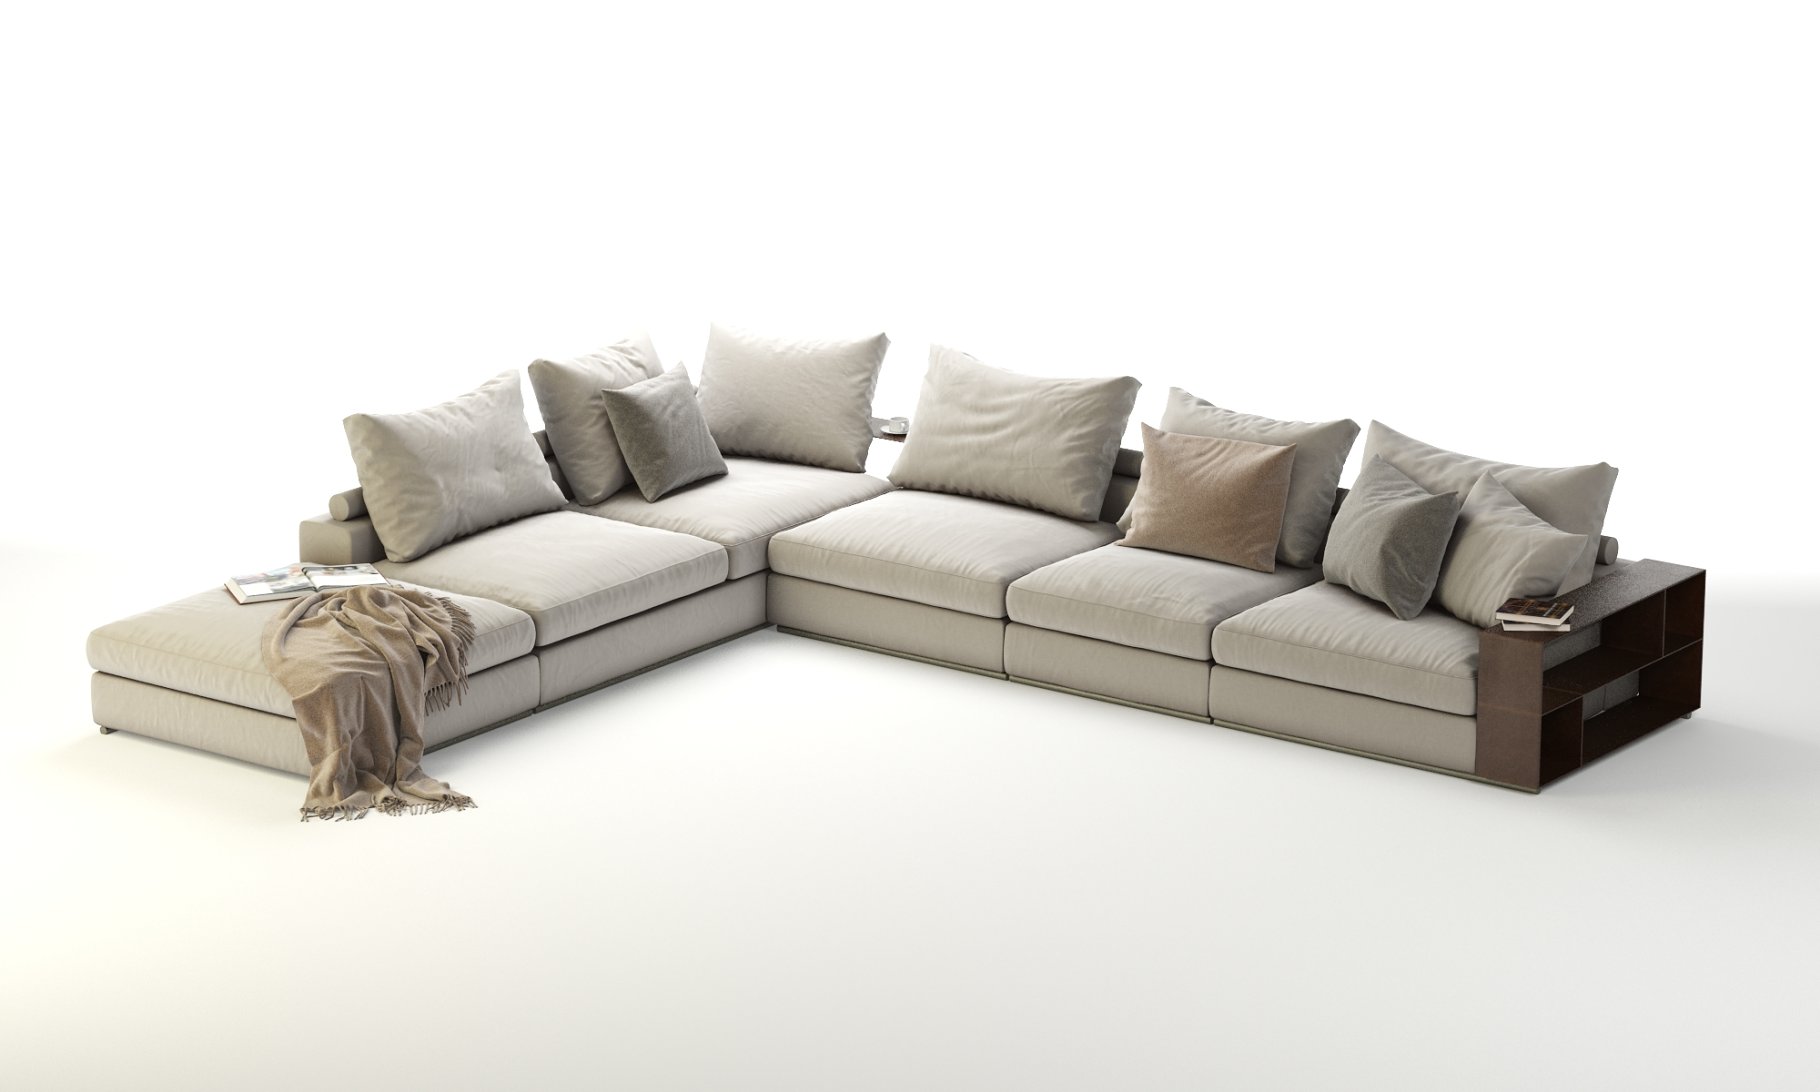 Images of a beautiful 3d model of a corner sectional sofa